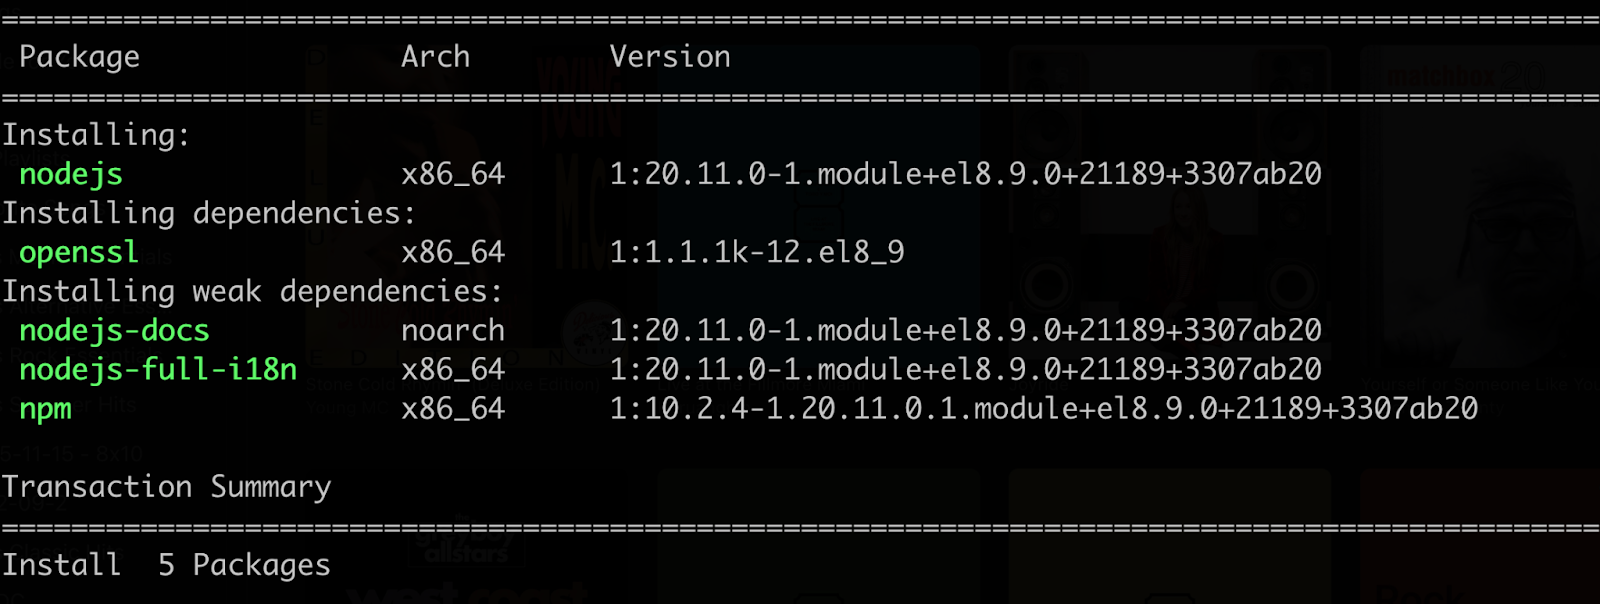 Enable the Node.js module Install